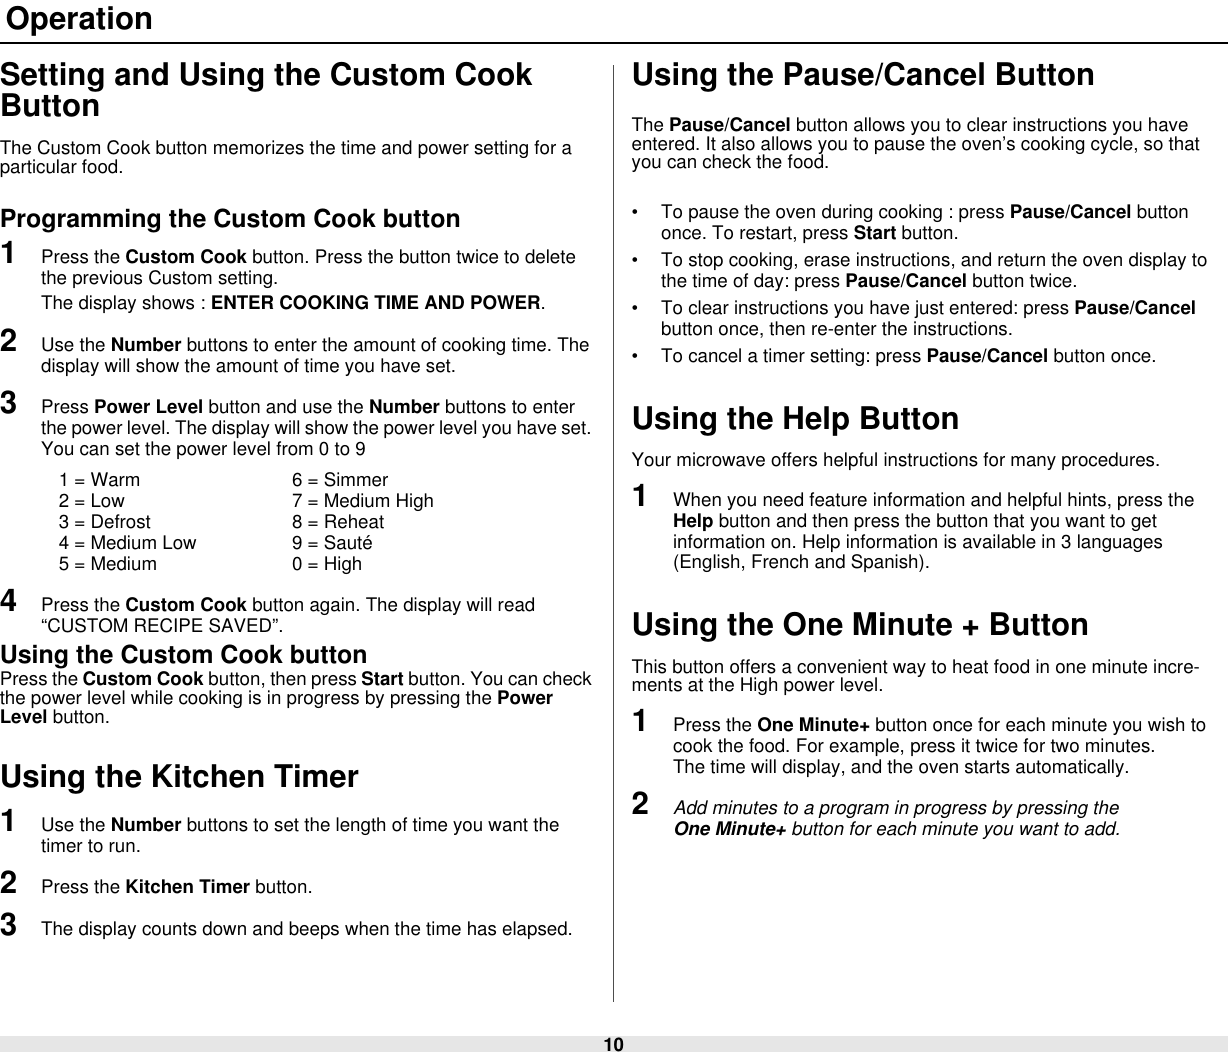 10 OperationSetting and Using the Custom Cook ButtonThe Custom Cook button memorizes the time and power setting for a particular food.Programming the Custom Cook button1Press the Custom Cook button. Press the button twice to delete the previous Custom setting. The display shows : ENTER COOKING TIME AND POWER.2Use the Number buttons to enter the amount of cooking time. The display will show the amount of time you have set.3Press Power Level button and use the Number buttons to enter the power level. The display will show the power level you have set. You can set the power level from 0 to 91 = Warm 6 = Simmer2 = Low 7 = Medium High3 = Defrost 8 = Reheat4 = Medium Low 9 = Sauté5 = Medium 0 = High4Press the Custom Cook button again. The display will read “CUSTOM RECIPE SAVED”.Using the Custom Cook buttonPress the Custom Cook button, then press Start button. You can check the power level while cooking is in progress by pressing the Power Level button.Using the Kitchen Timer1Use the Number buttons to set the length of time you want the timer to run.2Press the Kitchen Timer button.3The display counts down and beeps when the time has elapsed.Using the Pause/Cancel Button The Pause/Cancel button allows you to clear instructions you have entered. It also allows you to pause the oven’s cooking cycle, so that you can check the food.• To pause the oven during cooking : press Pause/Cancel button once. To restart, press Start button.• To stop cooking, erase instructions, and return the oven display to the time of day: press Pause/Cancel button twice.• To clear instructions you have just entered: press Pause/Cancel button once, then re-enter the instructions.• To cancel a timer setting: press Pause/Cancel button once.Using the Help ButtonYour microwave offers helpful instructions for many procedures.1When you need feature information and helpful hints, press the Help button and then press the button that you want to get information on. Help information is available in 3 languages (English, French and Spanish).Using the One Minute + ButtonThis button offers a convenient way to heat food in one minute incre-ments at the High power level.1Press the One Minute+ button once for each minute you wish to cook the food. For example, press it twice for two minutes.          The time will display, and the oven starts automatically. 2Add minutes to a program in progress by pressing the                 One Minute+ button for each minute you want to add.